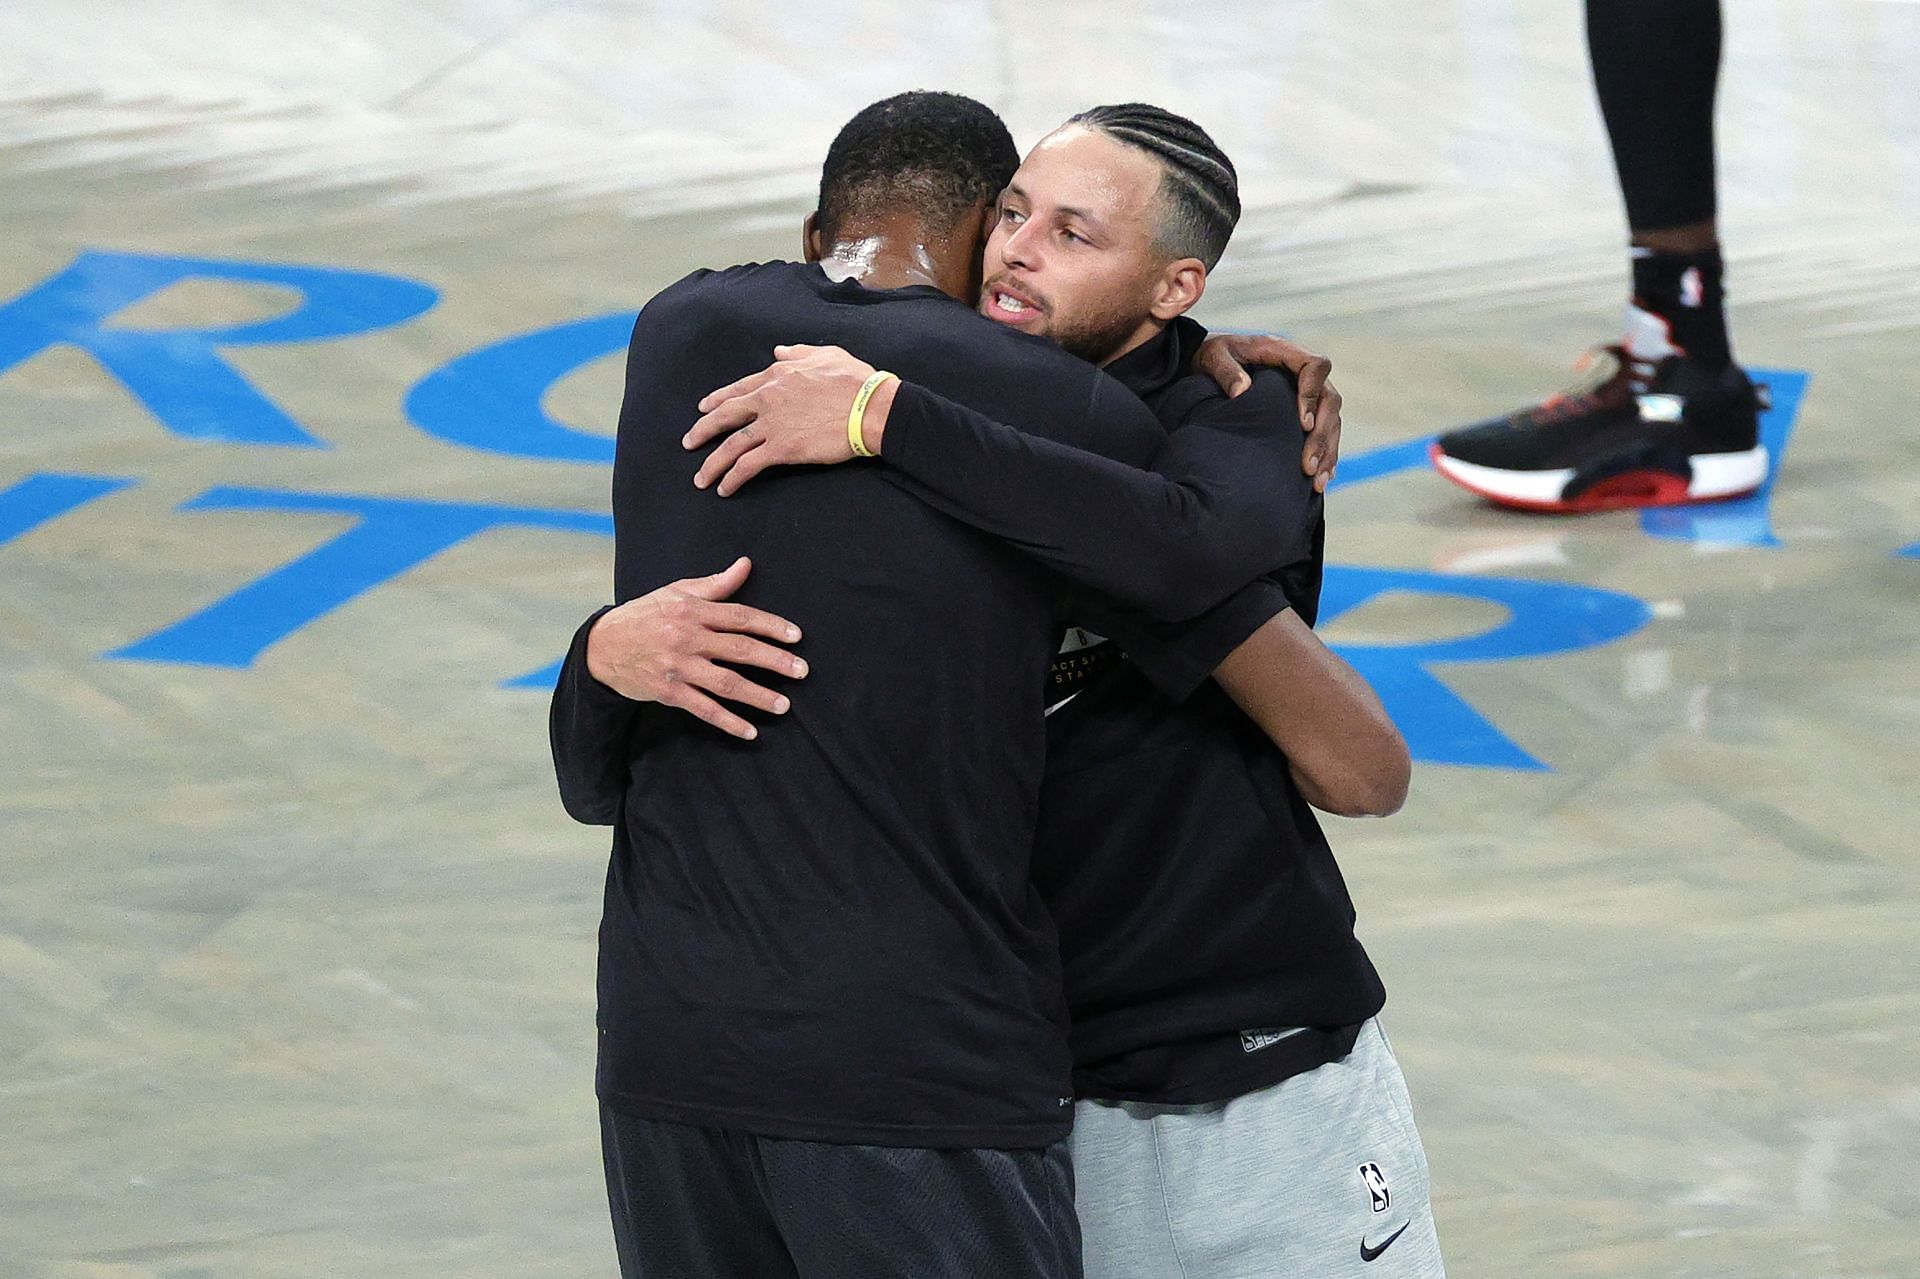 Curry and Durant embrace ahead of the Golden State Warriors versus Brooklyn Nets game.